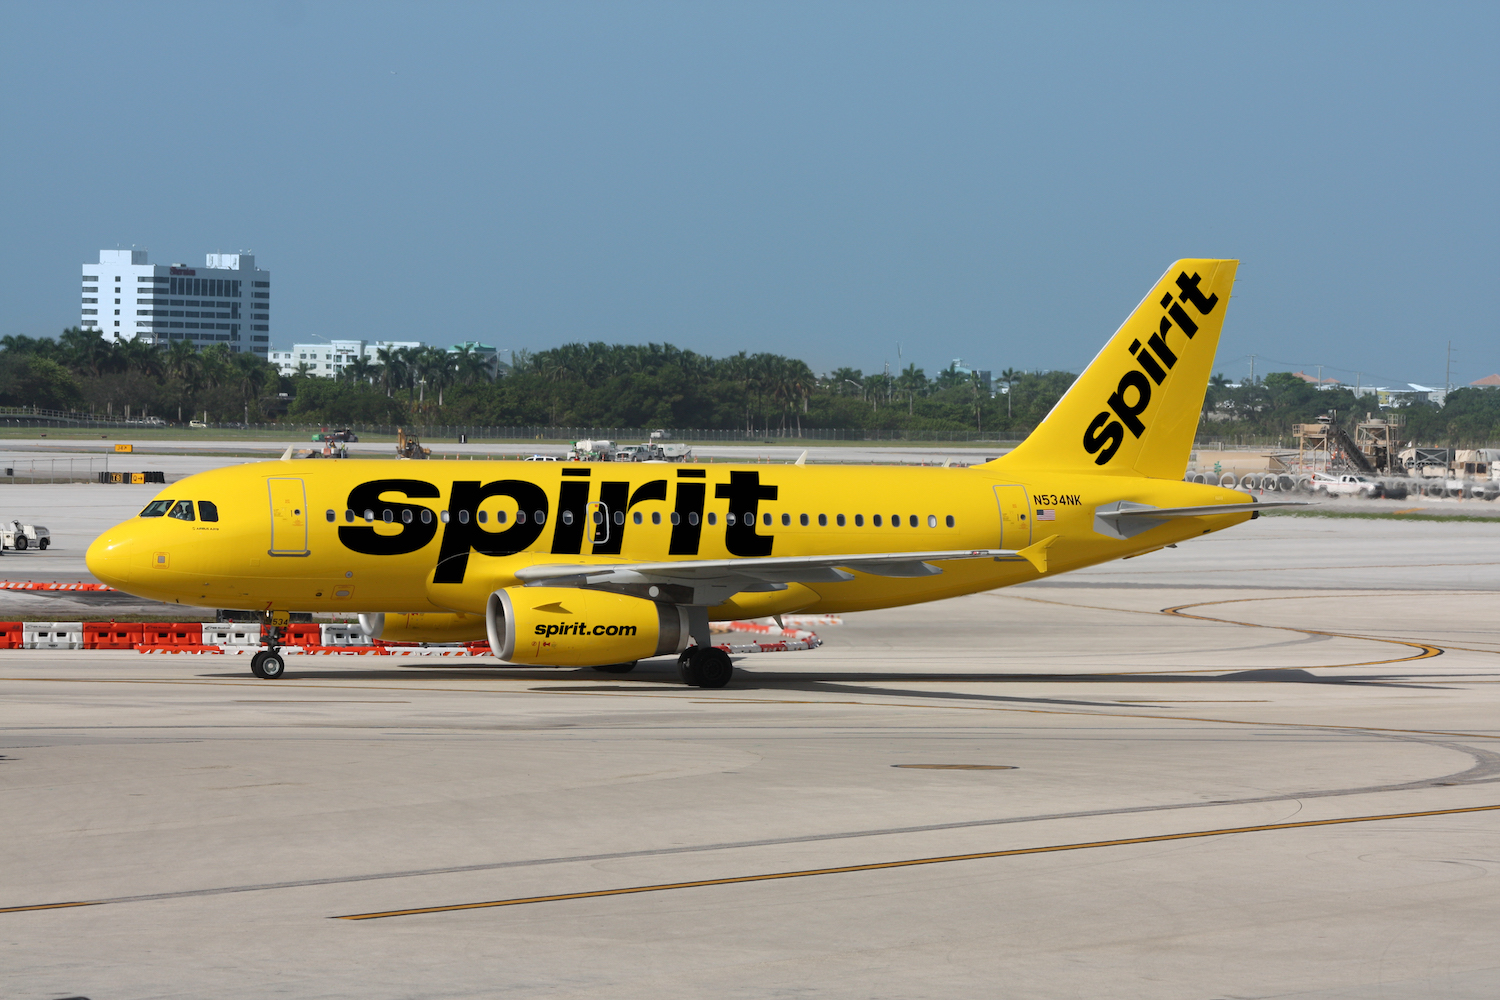 Spirit and Frontier are merging into one terrible airline and no one is admitting it